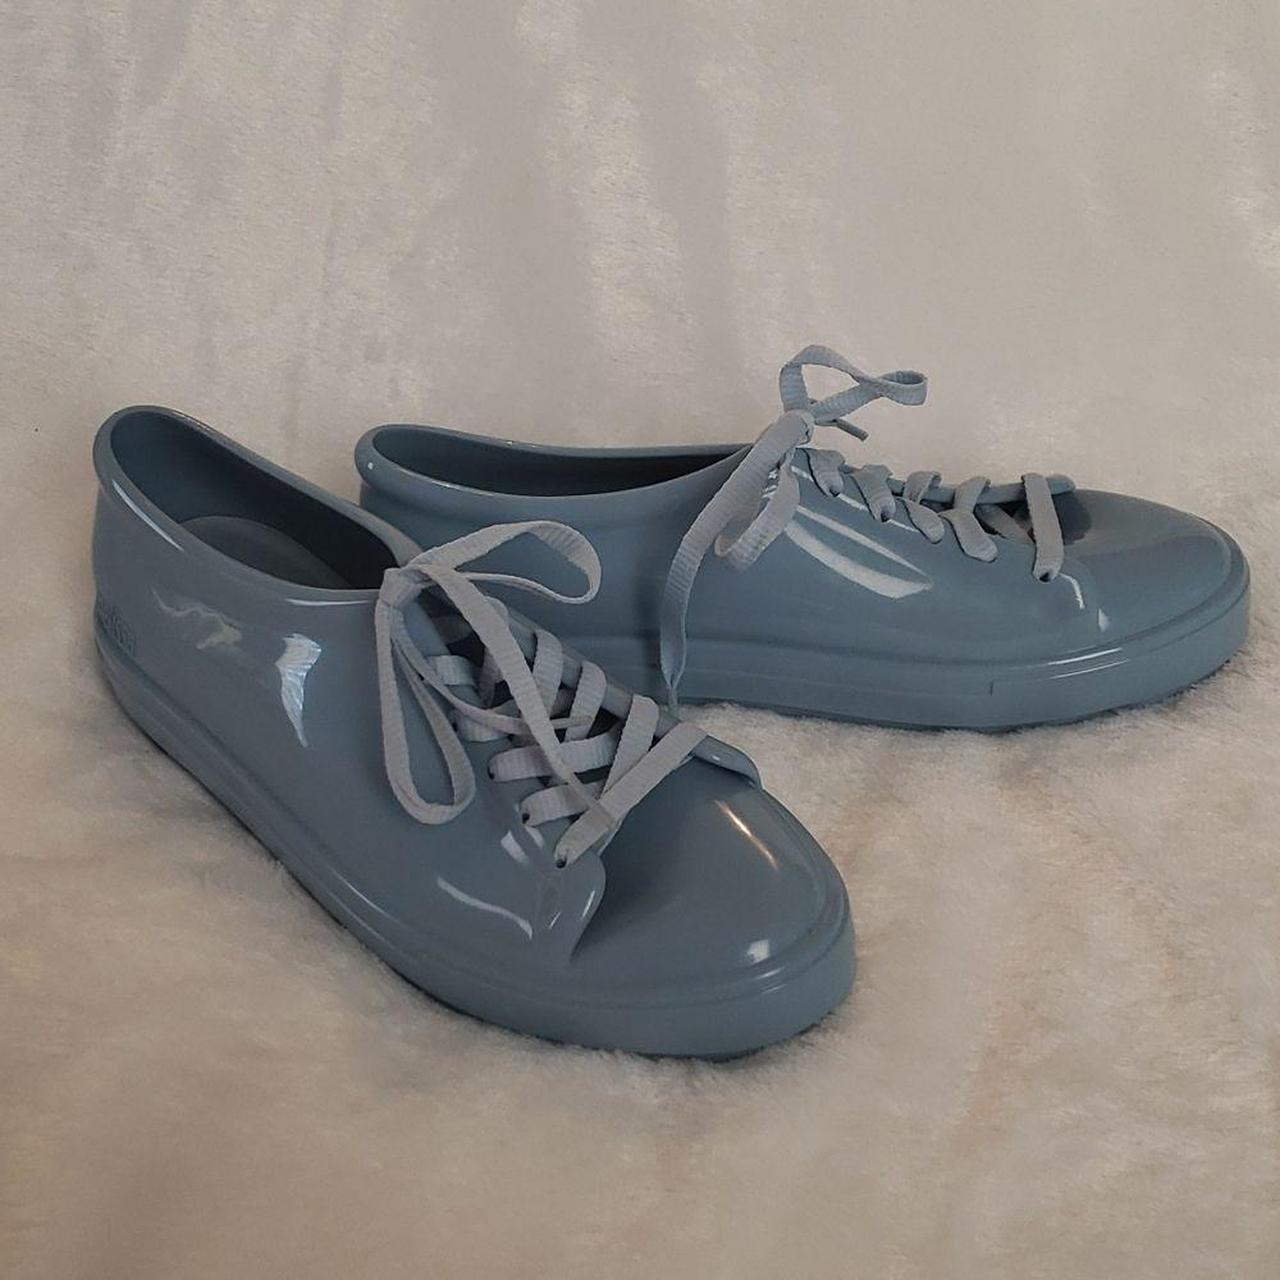 Product Image 1 - EUC women's rubber/plastic shoes in